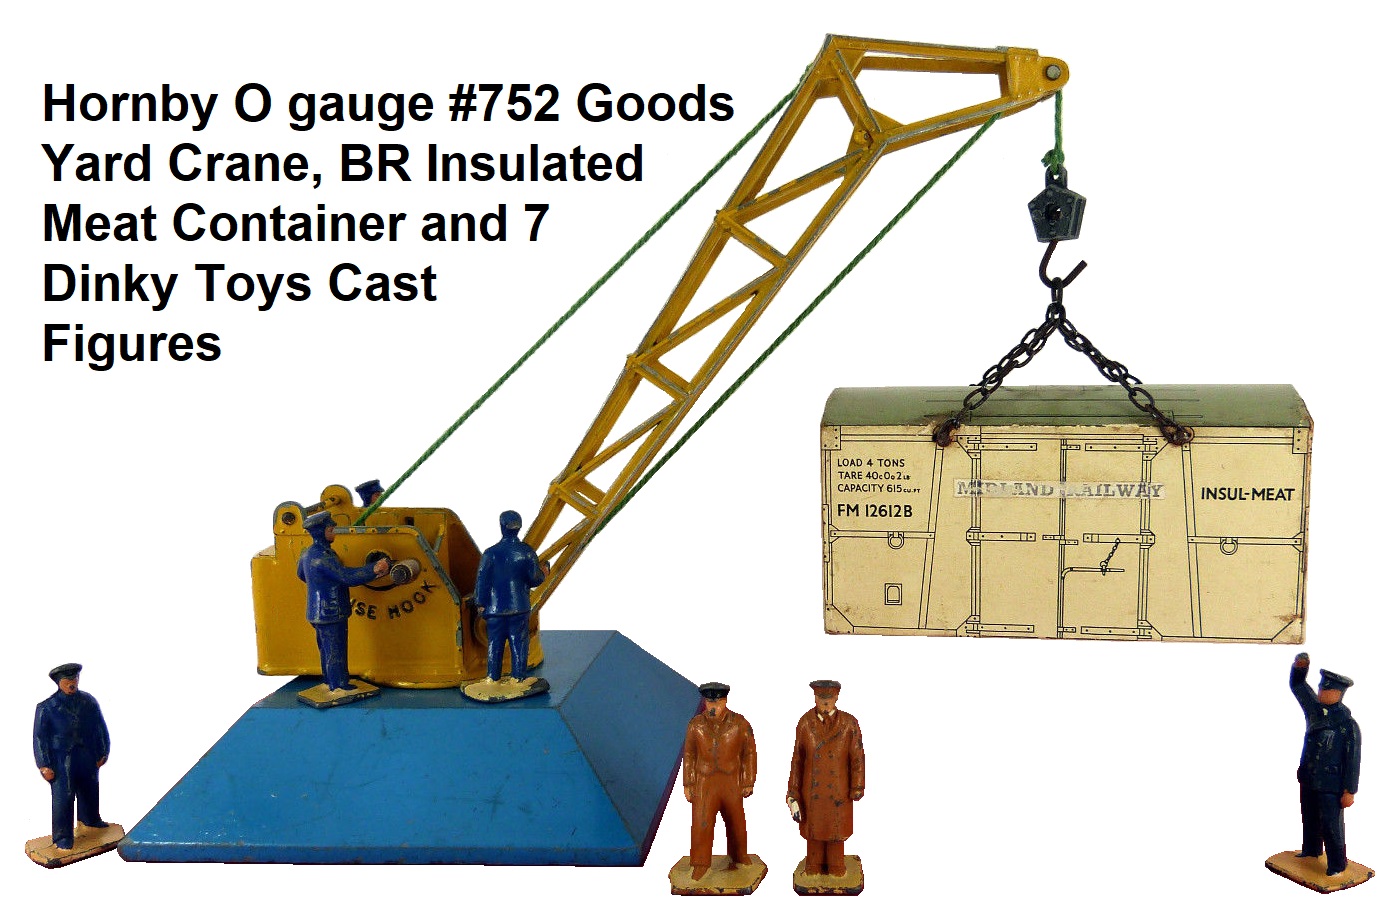 Hornby O gauge Goods Yard Crane #752, BR Insulated Meat Container and 7 Cast Dinky Toys figures